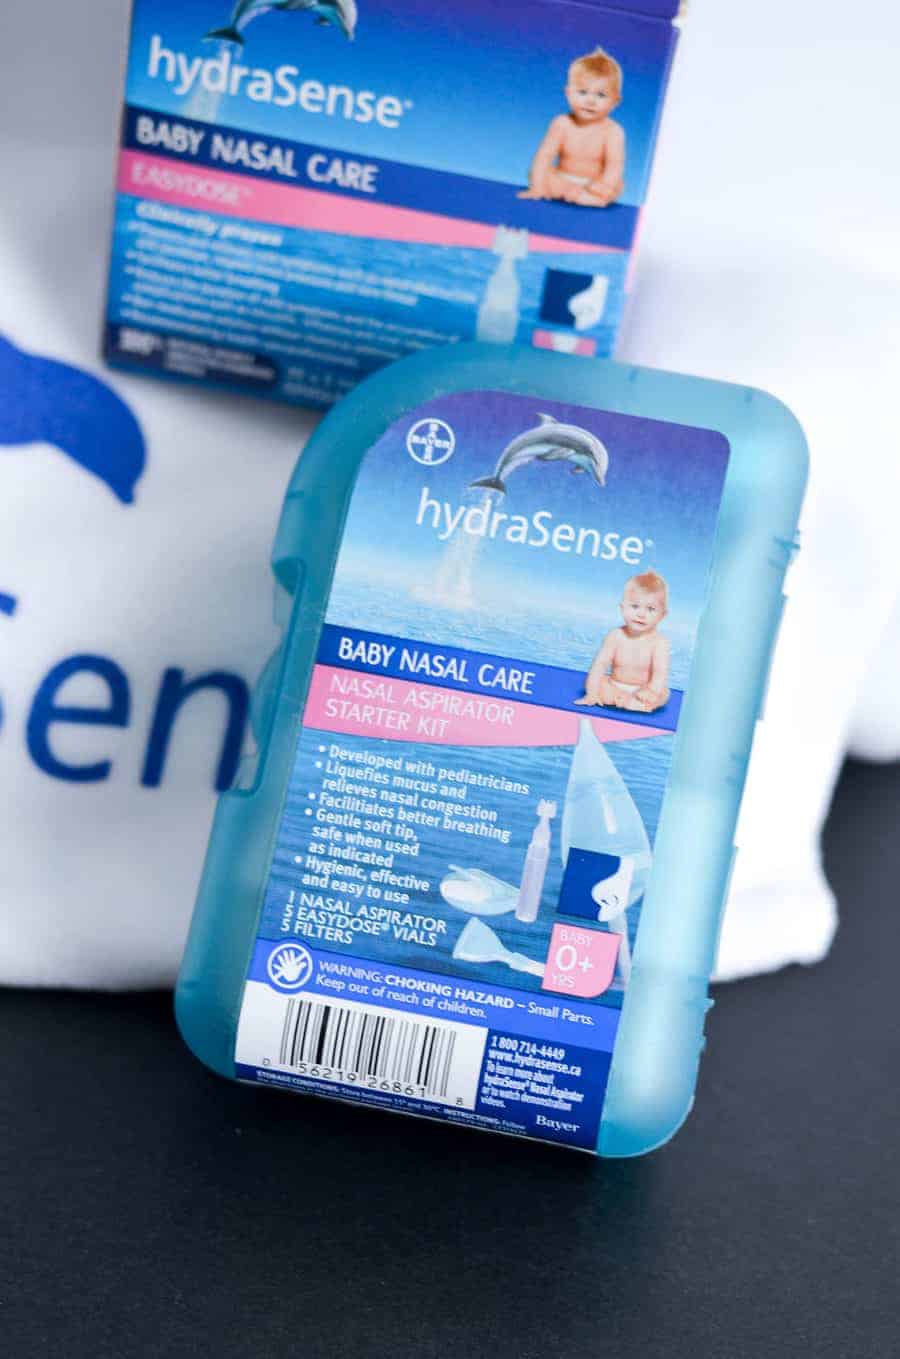 Today, I’m sharing my favorite tips on how to comfort your baby through a cold, including my #1 tip: using hydraSense® Baby Nasal Care! Let’s check them out!